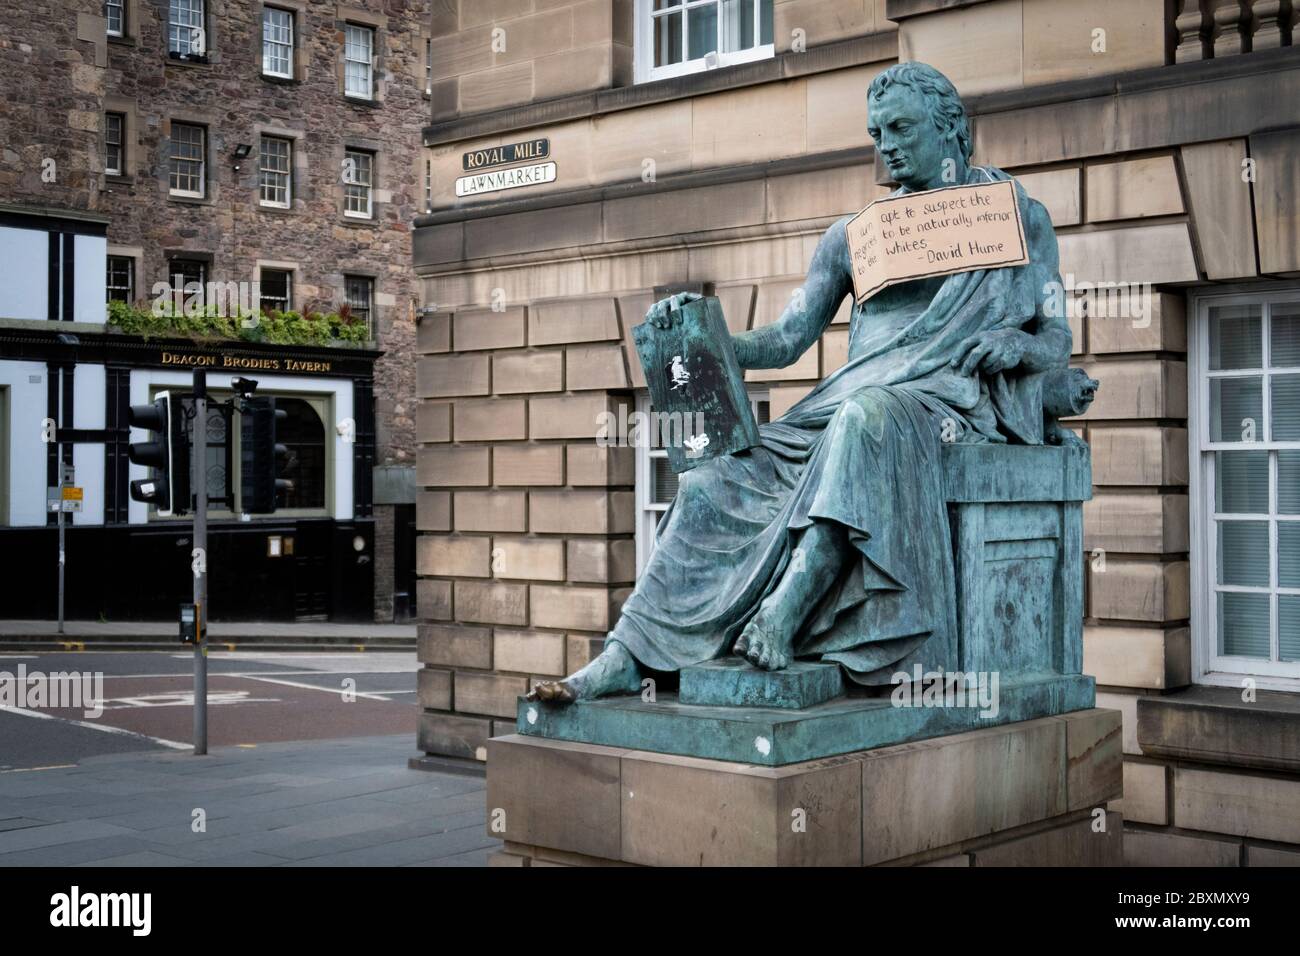 A poster hangs from the statue of the 18th Century philosopher David Hume on the Royal Mile, Edinburgh, following the Black Lives Matter protest rally on June 7, 2020, in Holyrood Park, Edinburgh, in memory of George Floyd who was killed on May 25 while in police custody in the US city of Minneapolis. Stock Photo